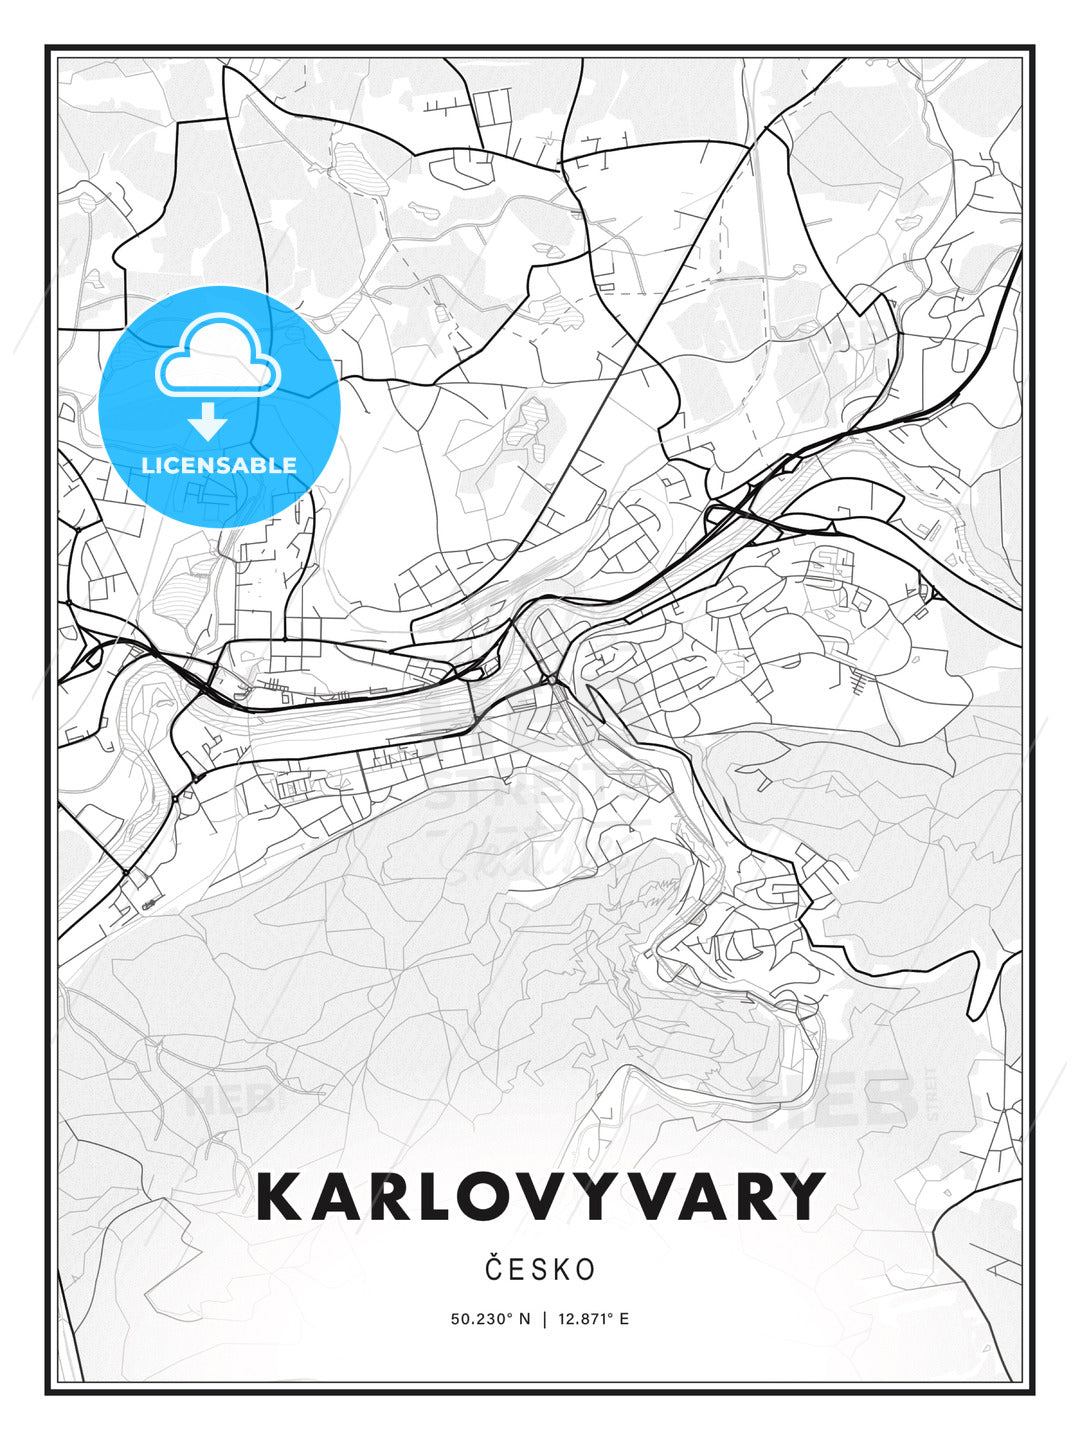 KARLOVYVARY / Karlovy Vary, Czechia, Modern Print Template in Various Formats - HEBSTREITS Sketches